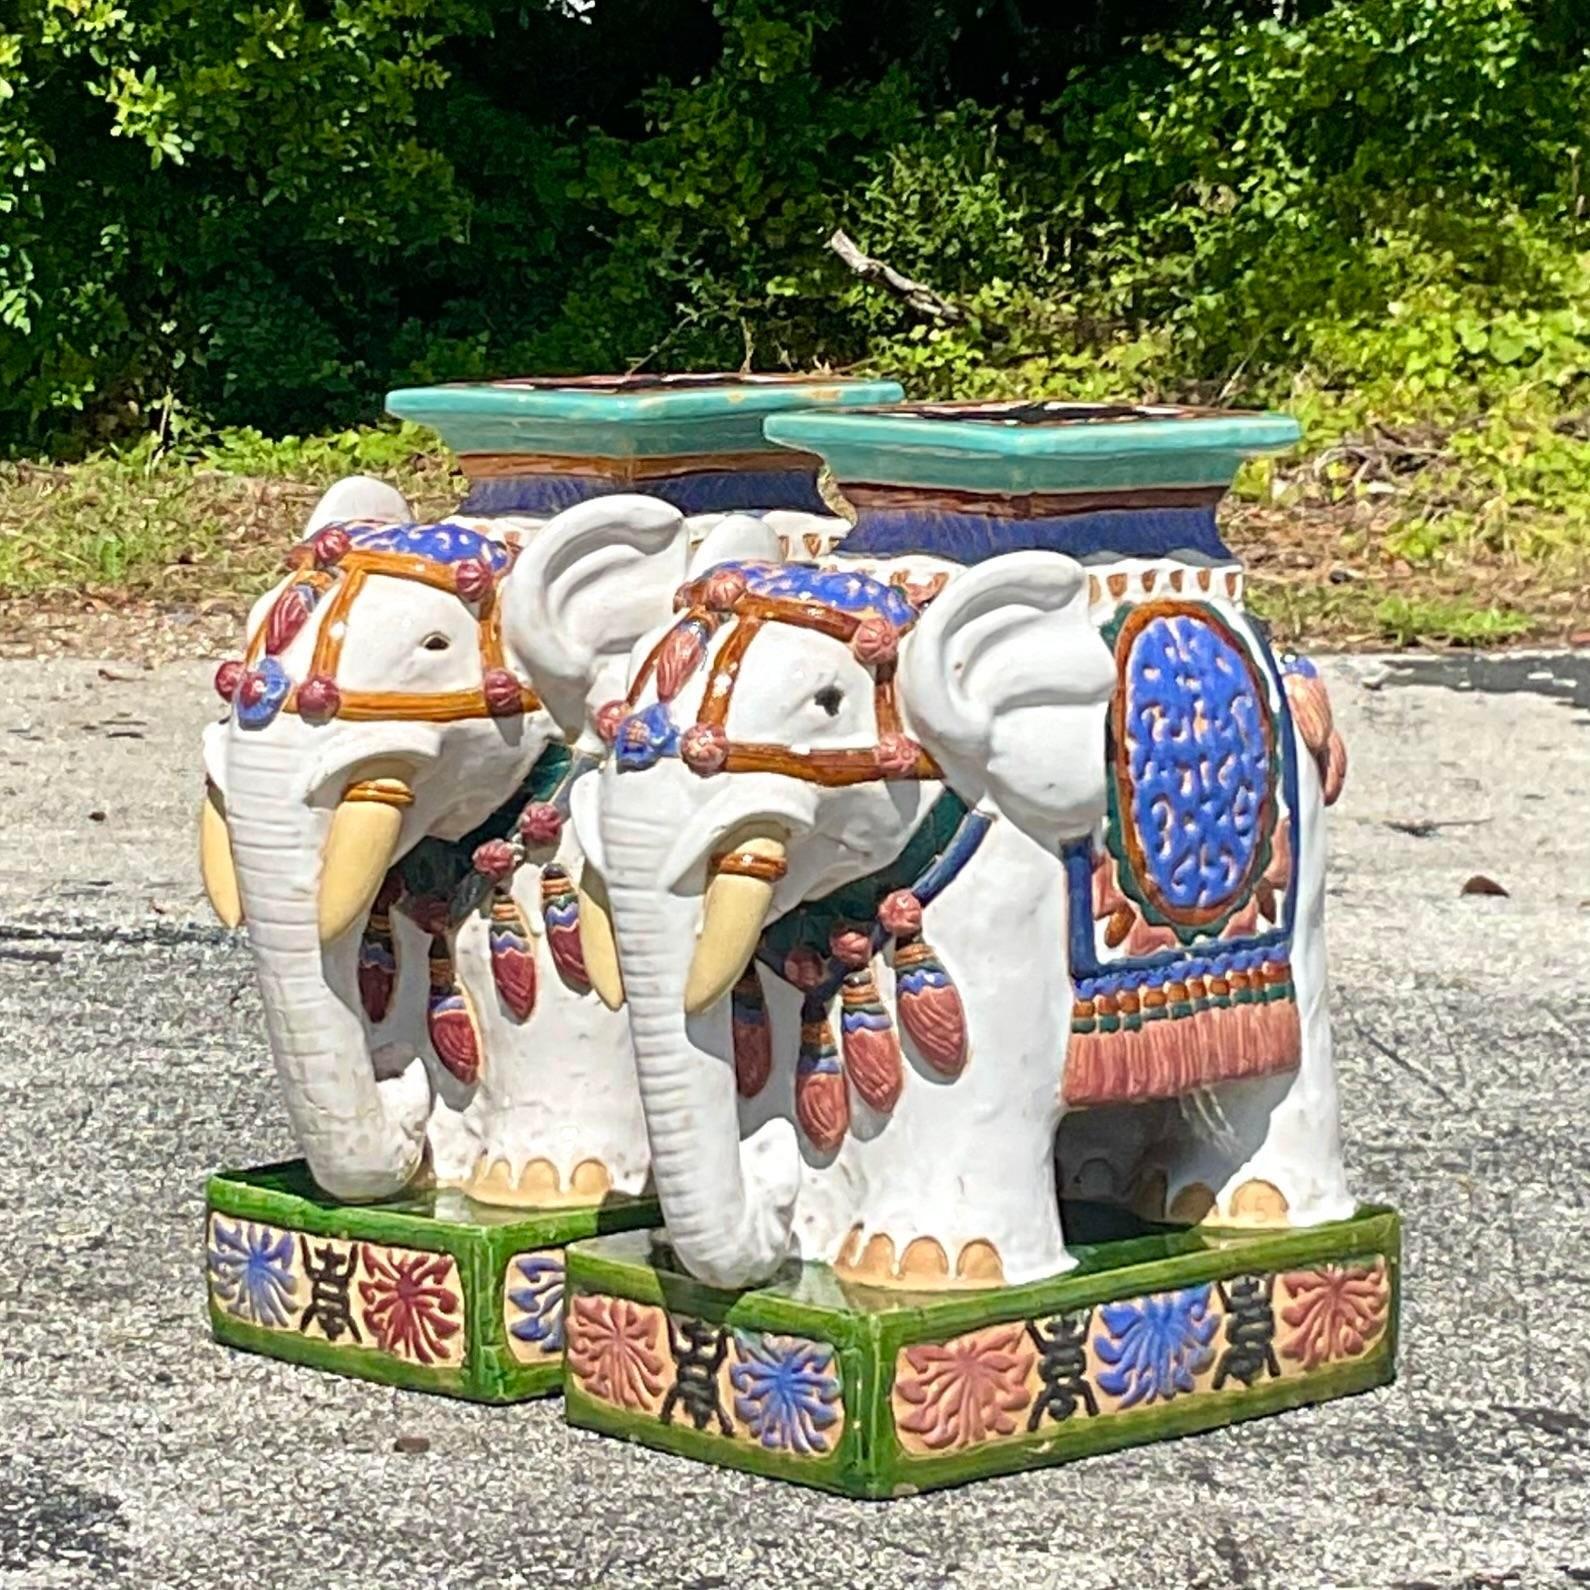 A fabulous pair of vintage low stools. The iconic elephant design in bright clear colors. The coveted XL size. Perfect indoors or outside. You decide! Acquired from a Palm Beach estate